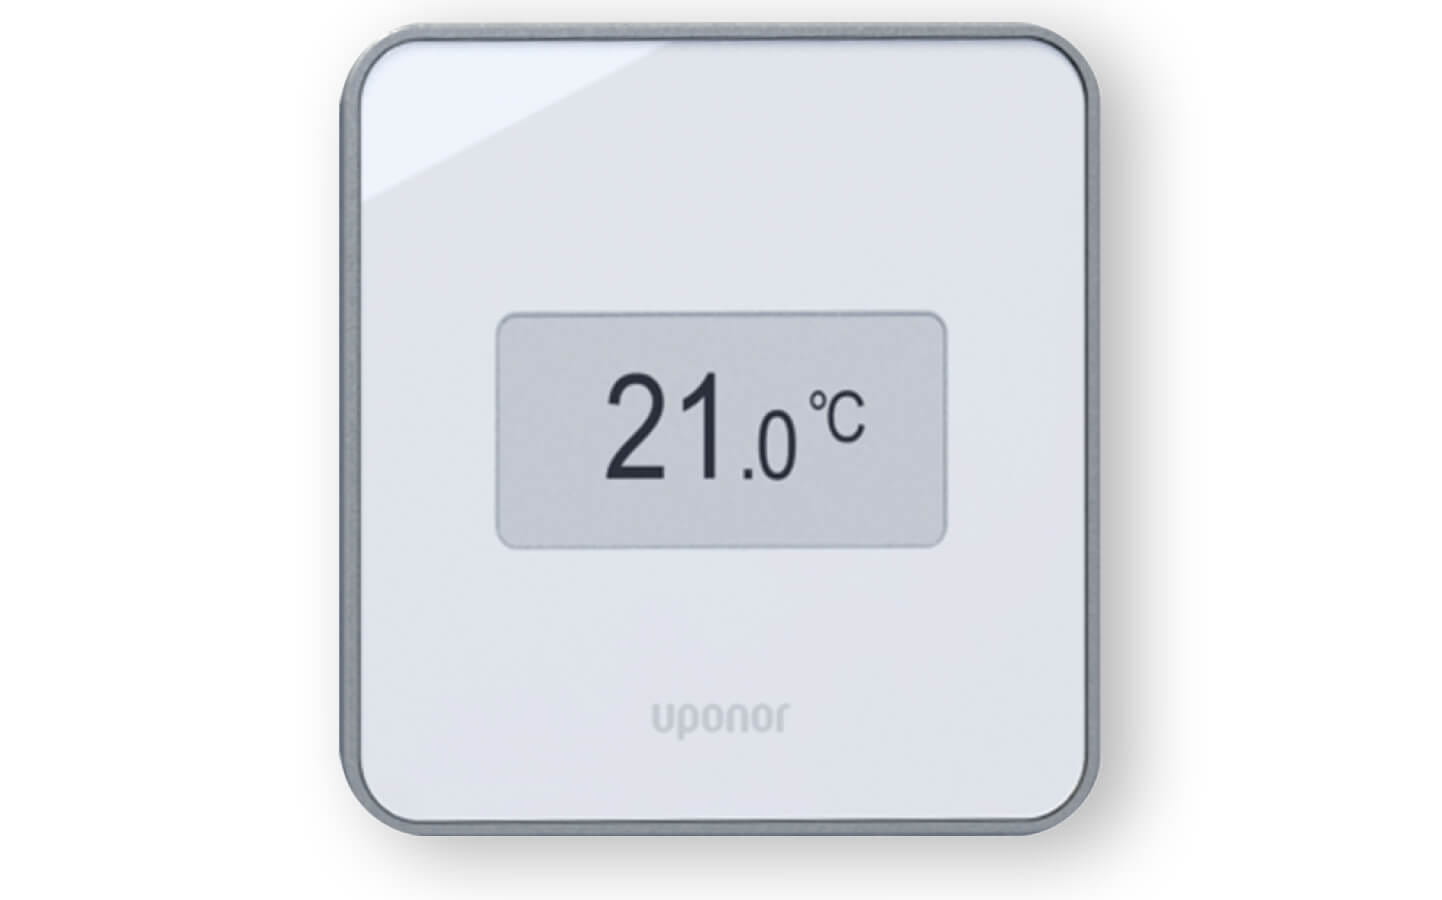 Uponor Smatrix Style thermostats